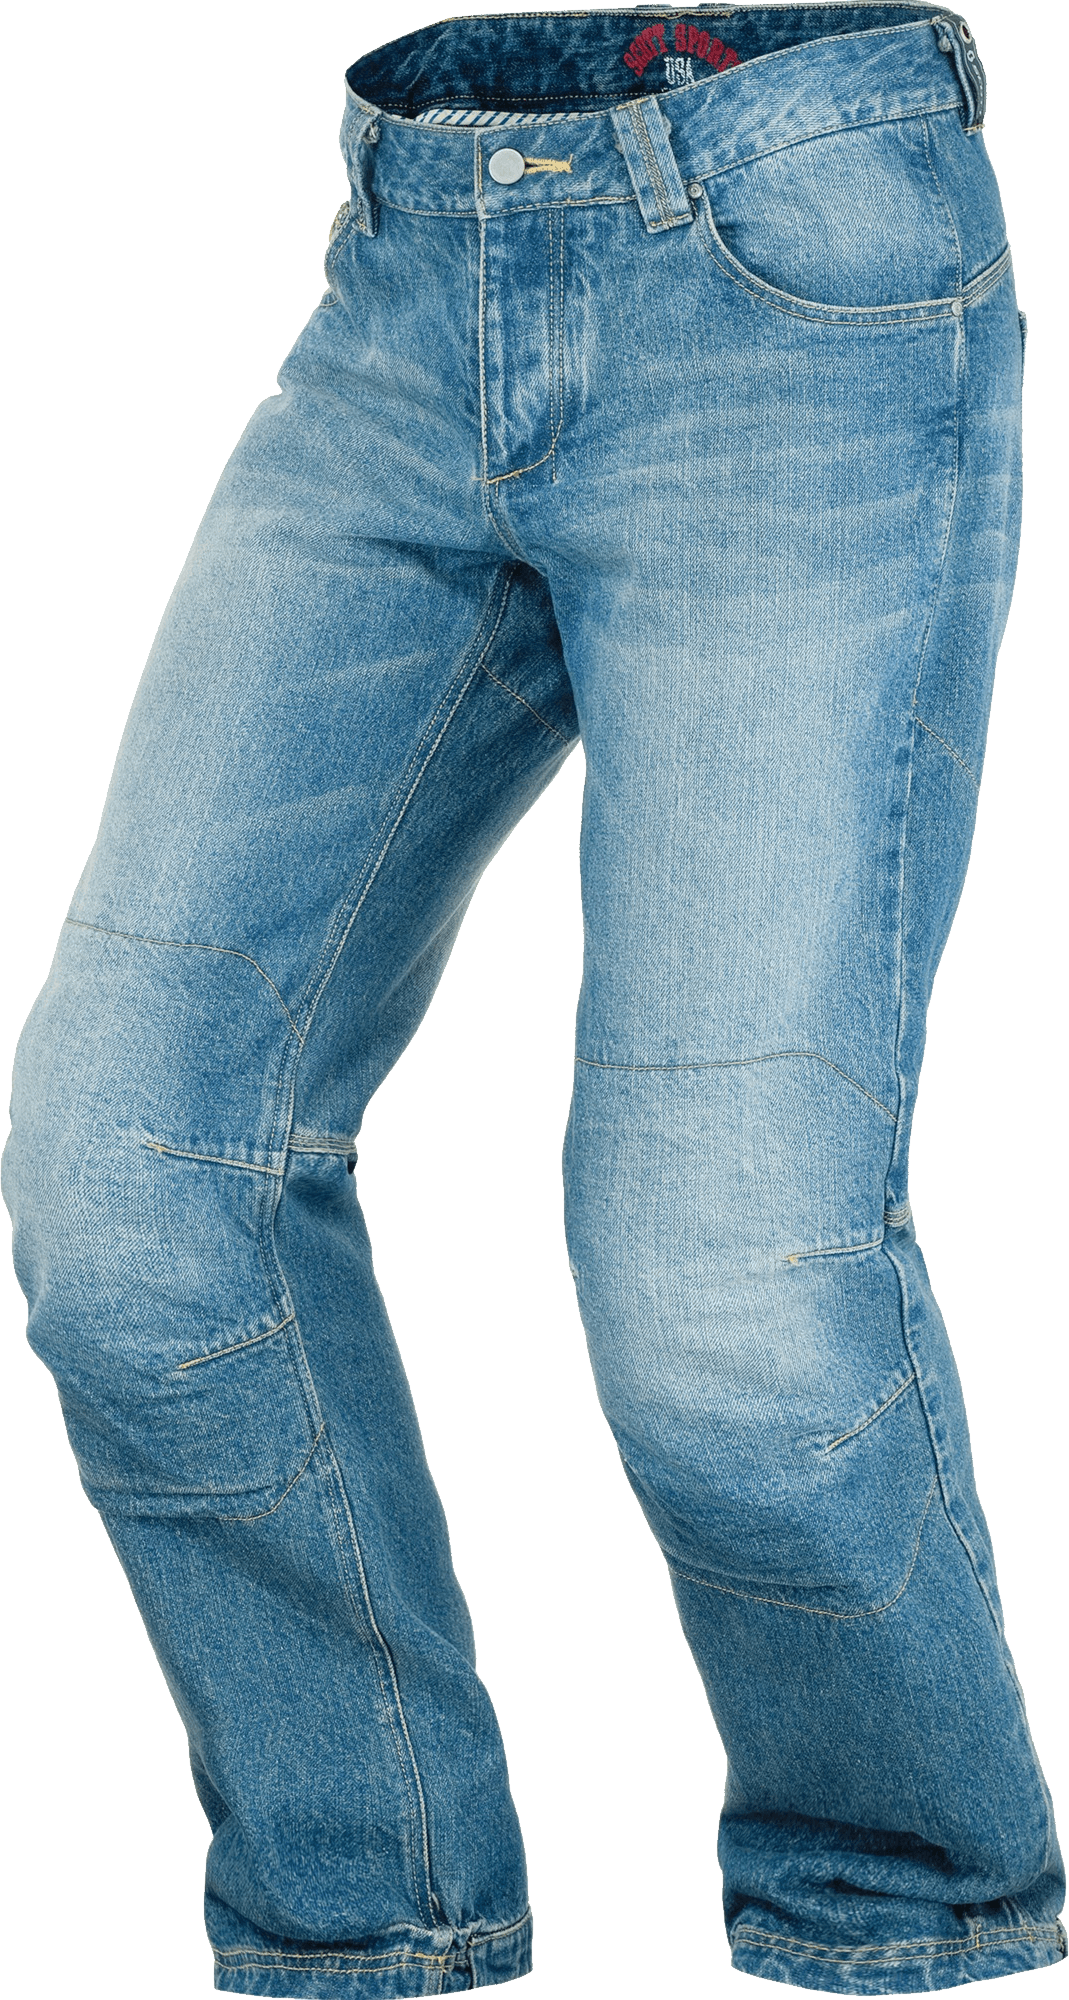 Blue Denim Jeans Standing Isolated